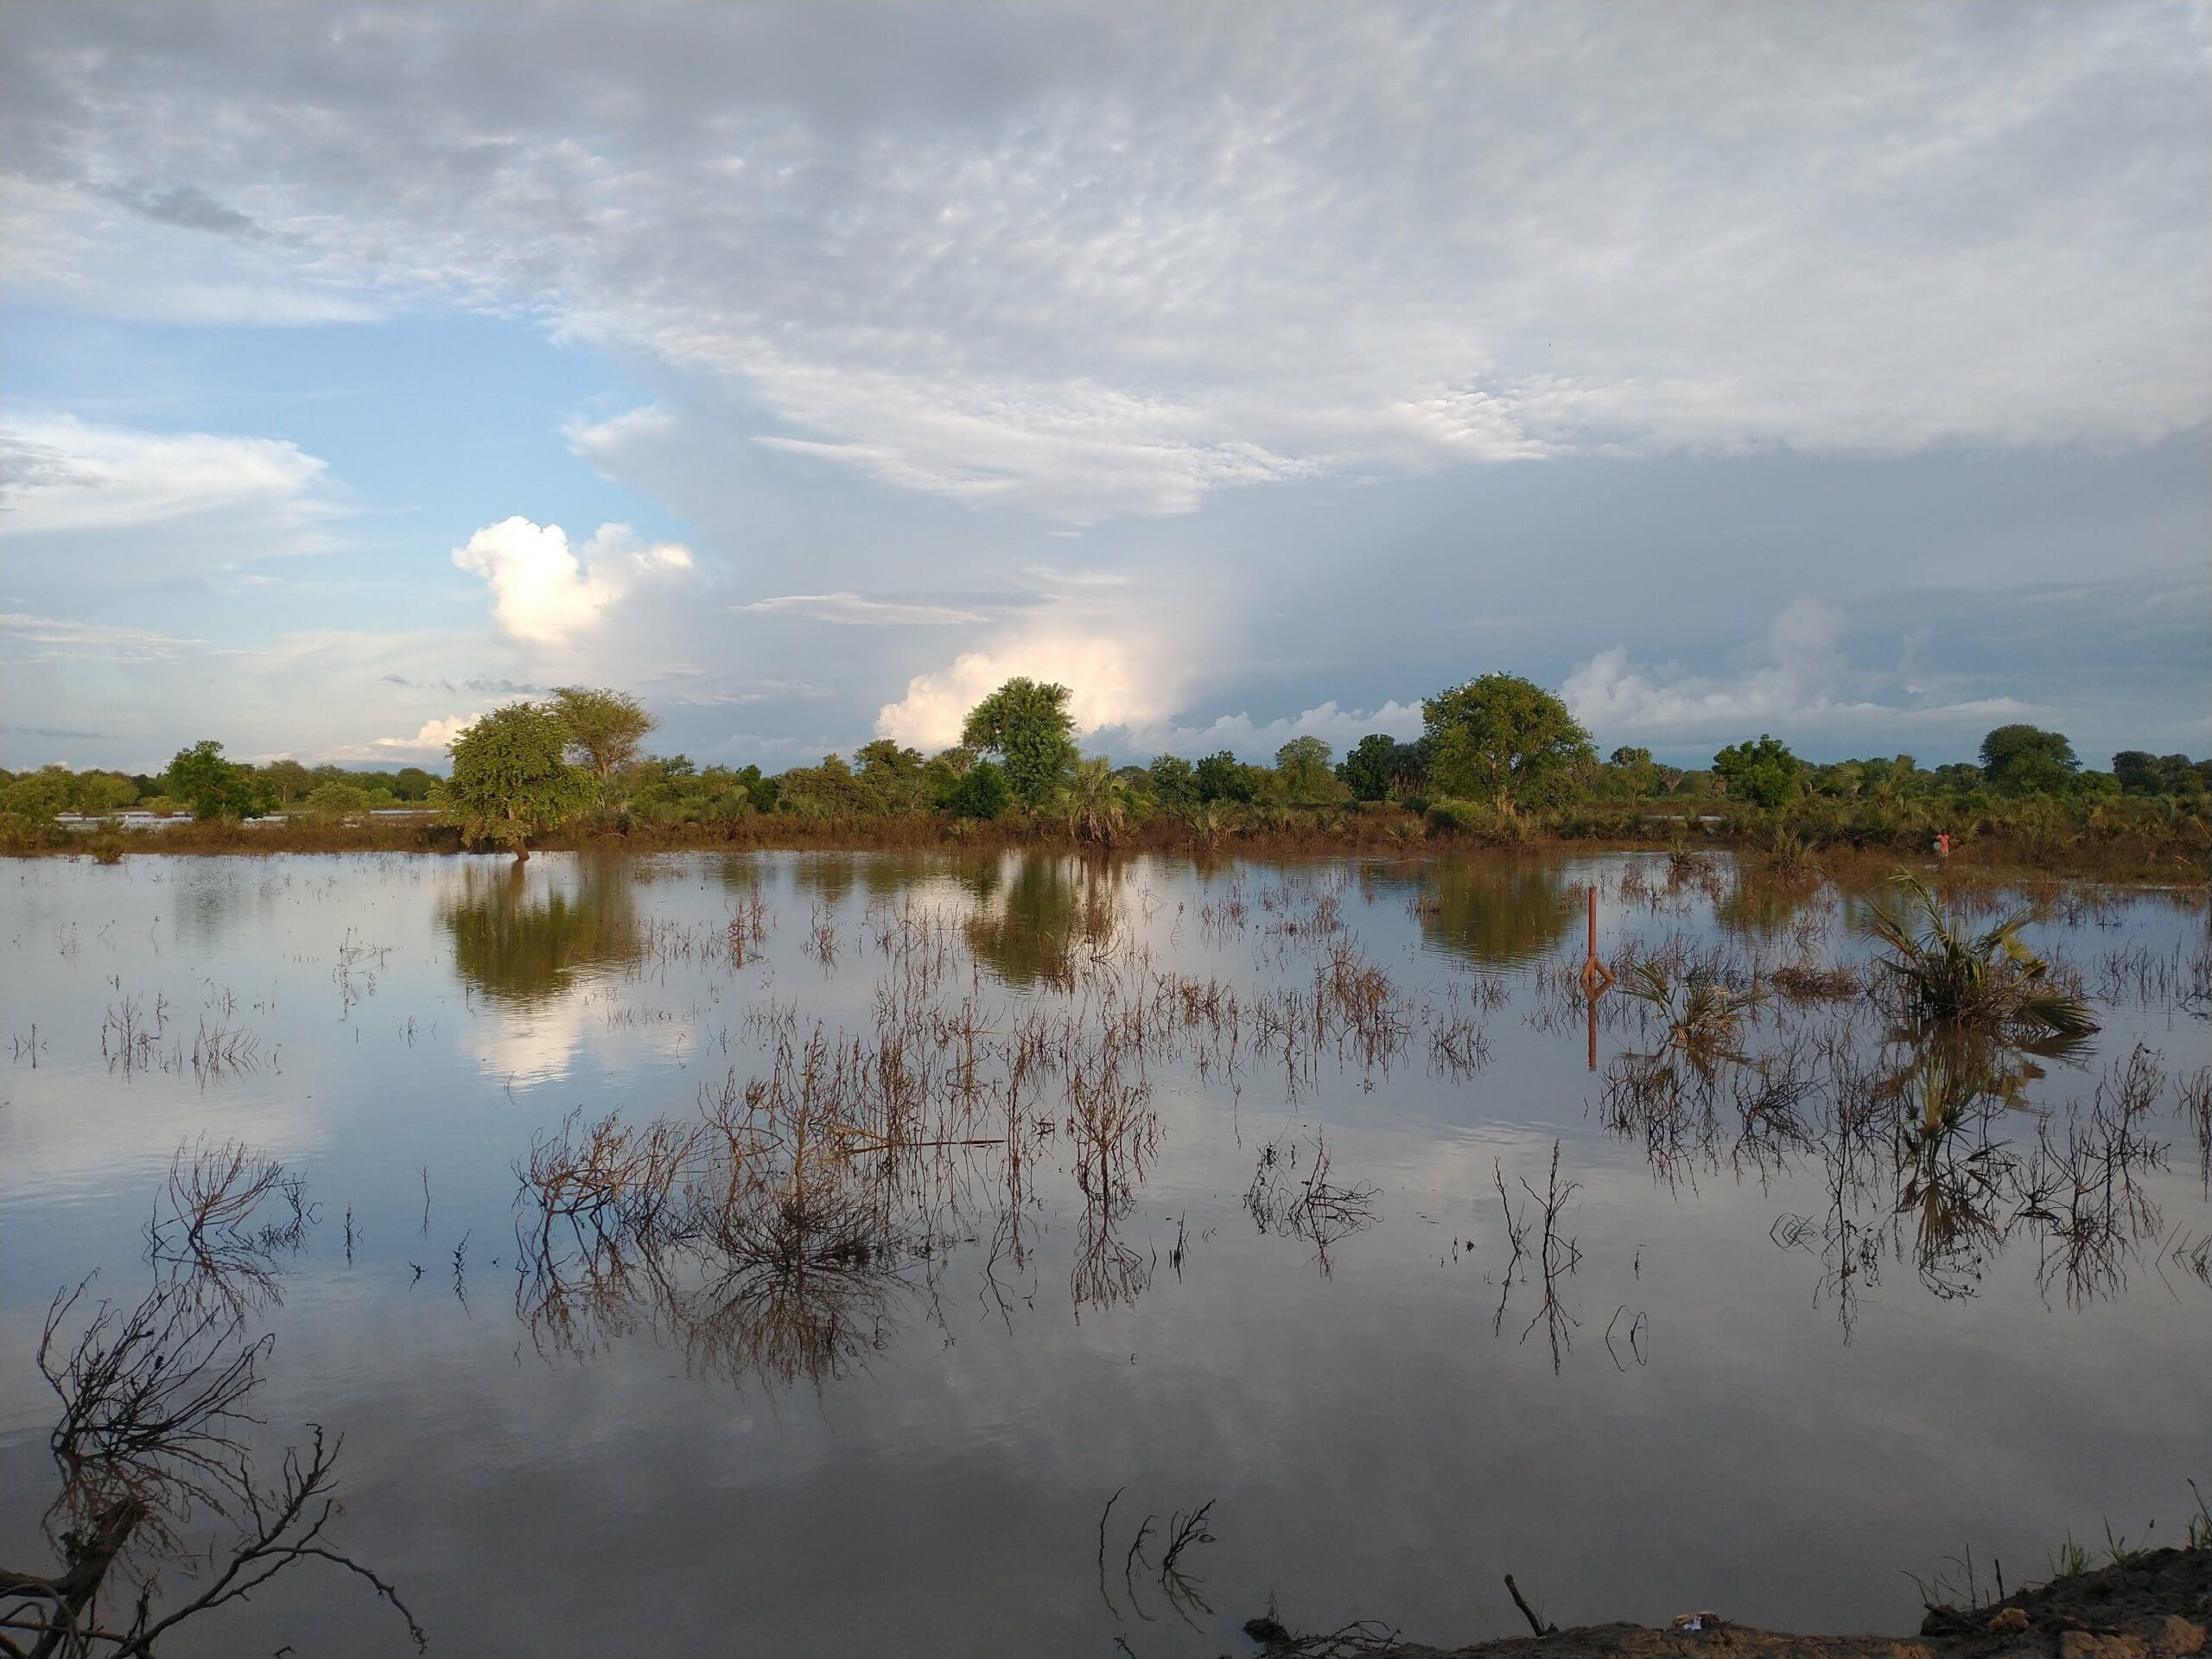 A flooded African field. The tops of bushes and small trees can be clearly seen poking out of the water.